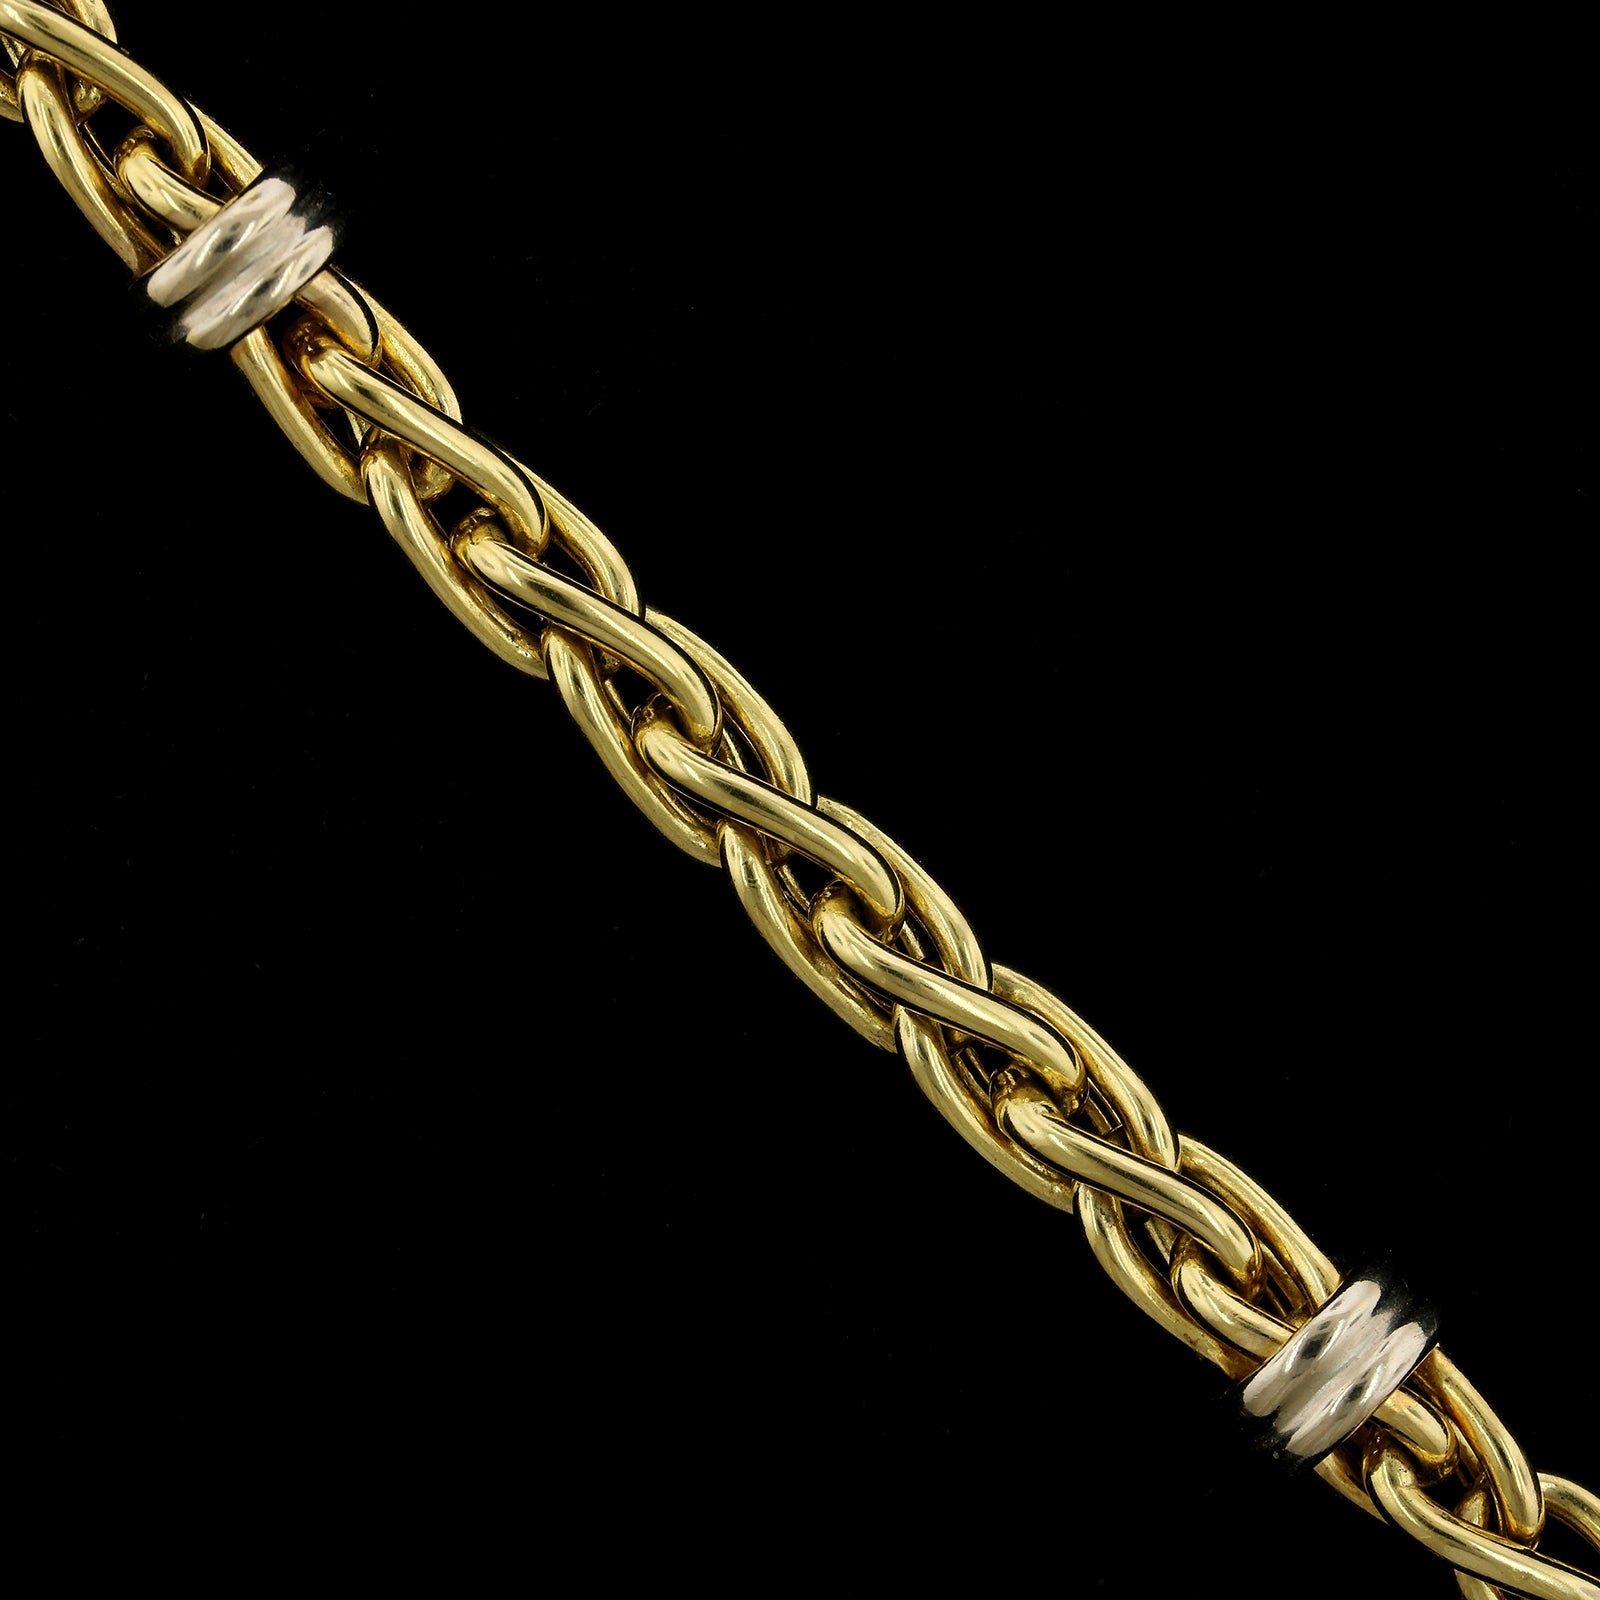 14K Two-tone Gold Estate Fancy Link Bracelet, 14k yellow and white gold, Long's Jewelers